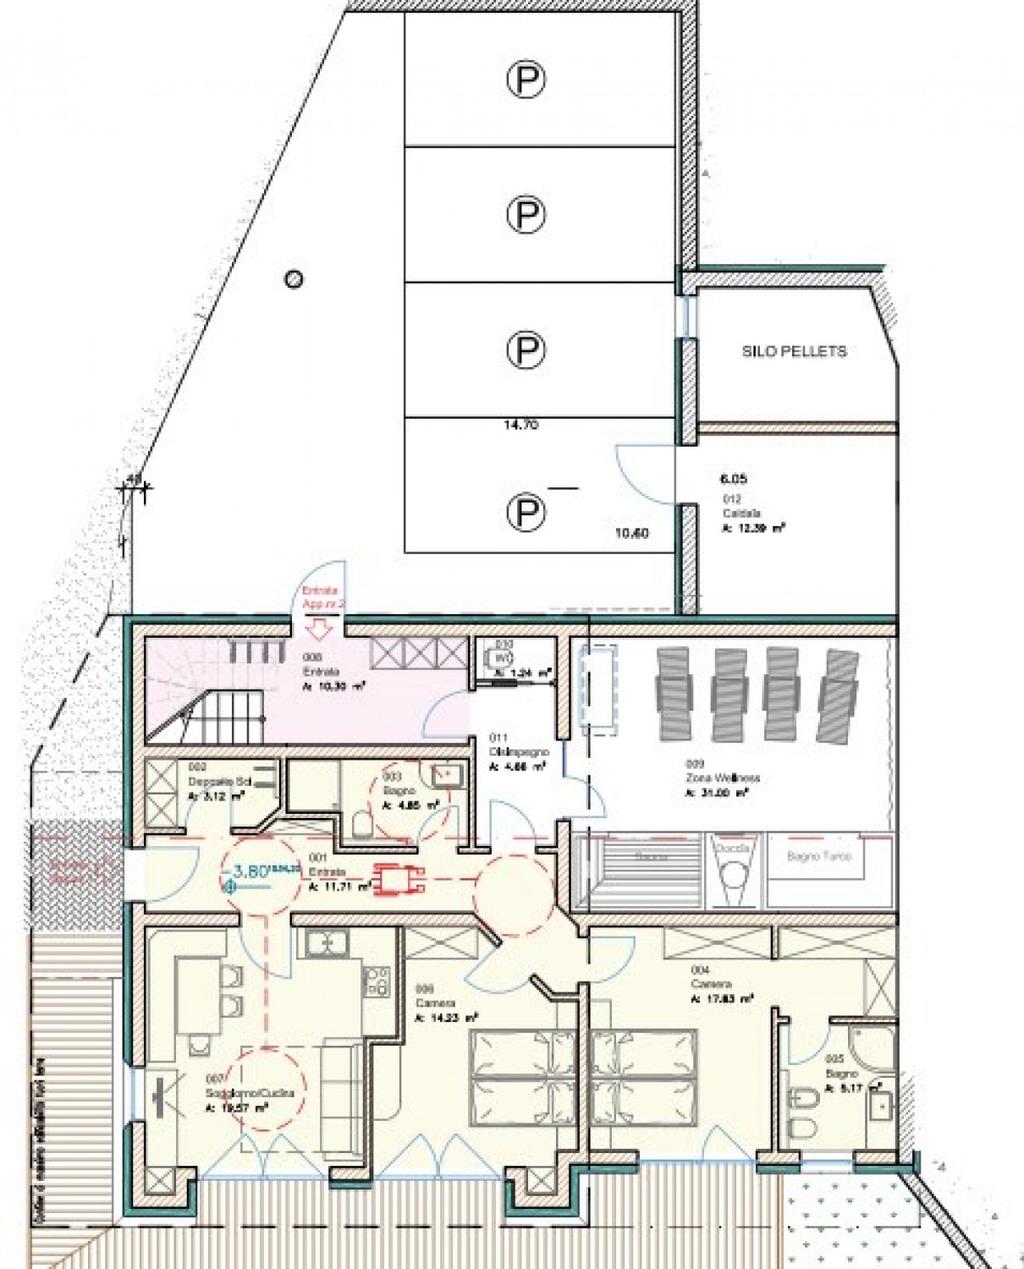 Day by Day SAFETY AWARENESS AND Layout Ground floor Fitness room Massage room Wellness area with steam room and sauna Three bathrooms Staff room to fit 2 people Garage to fit 3 cars Ski boot room